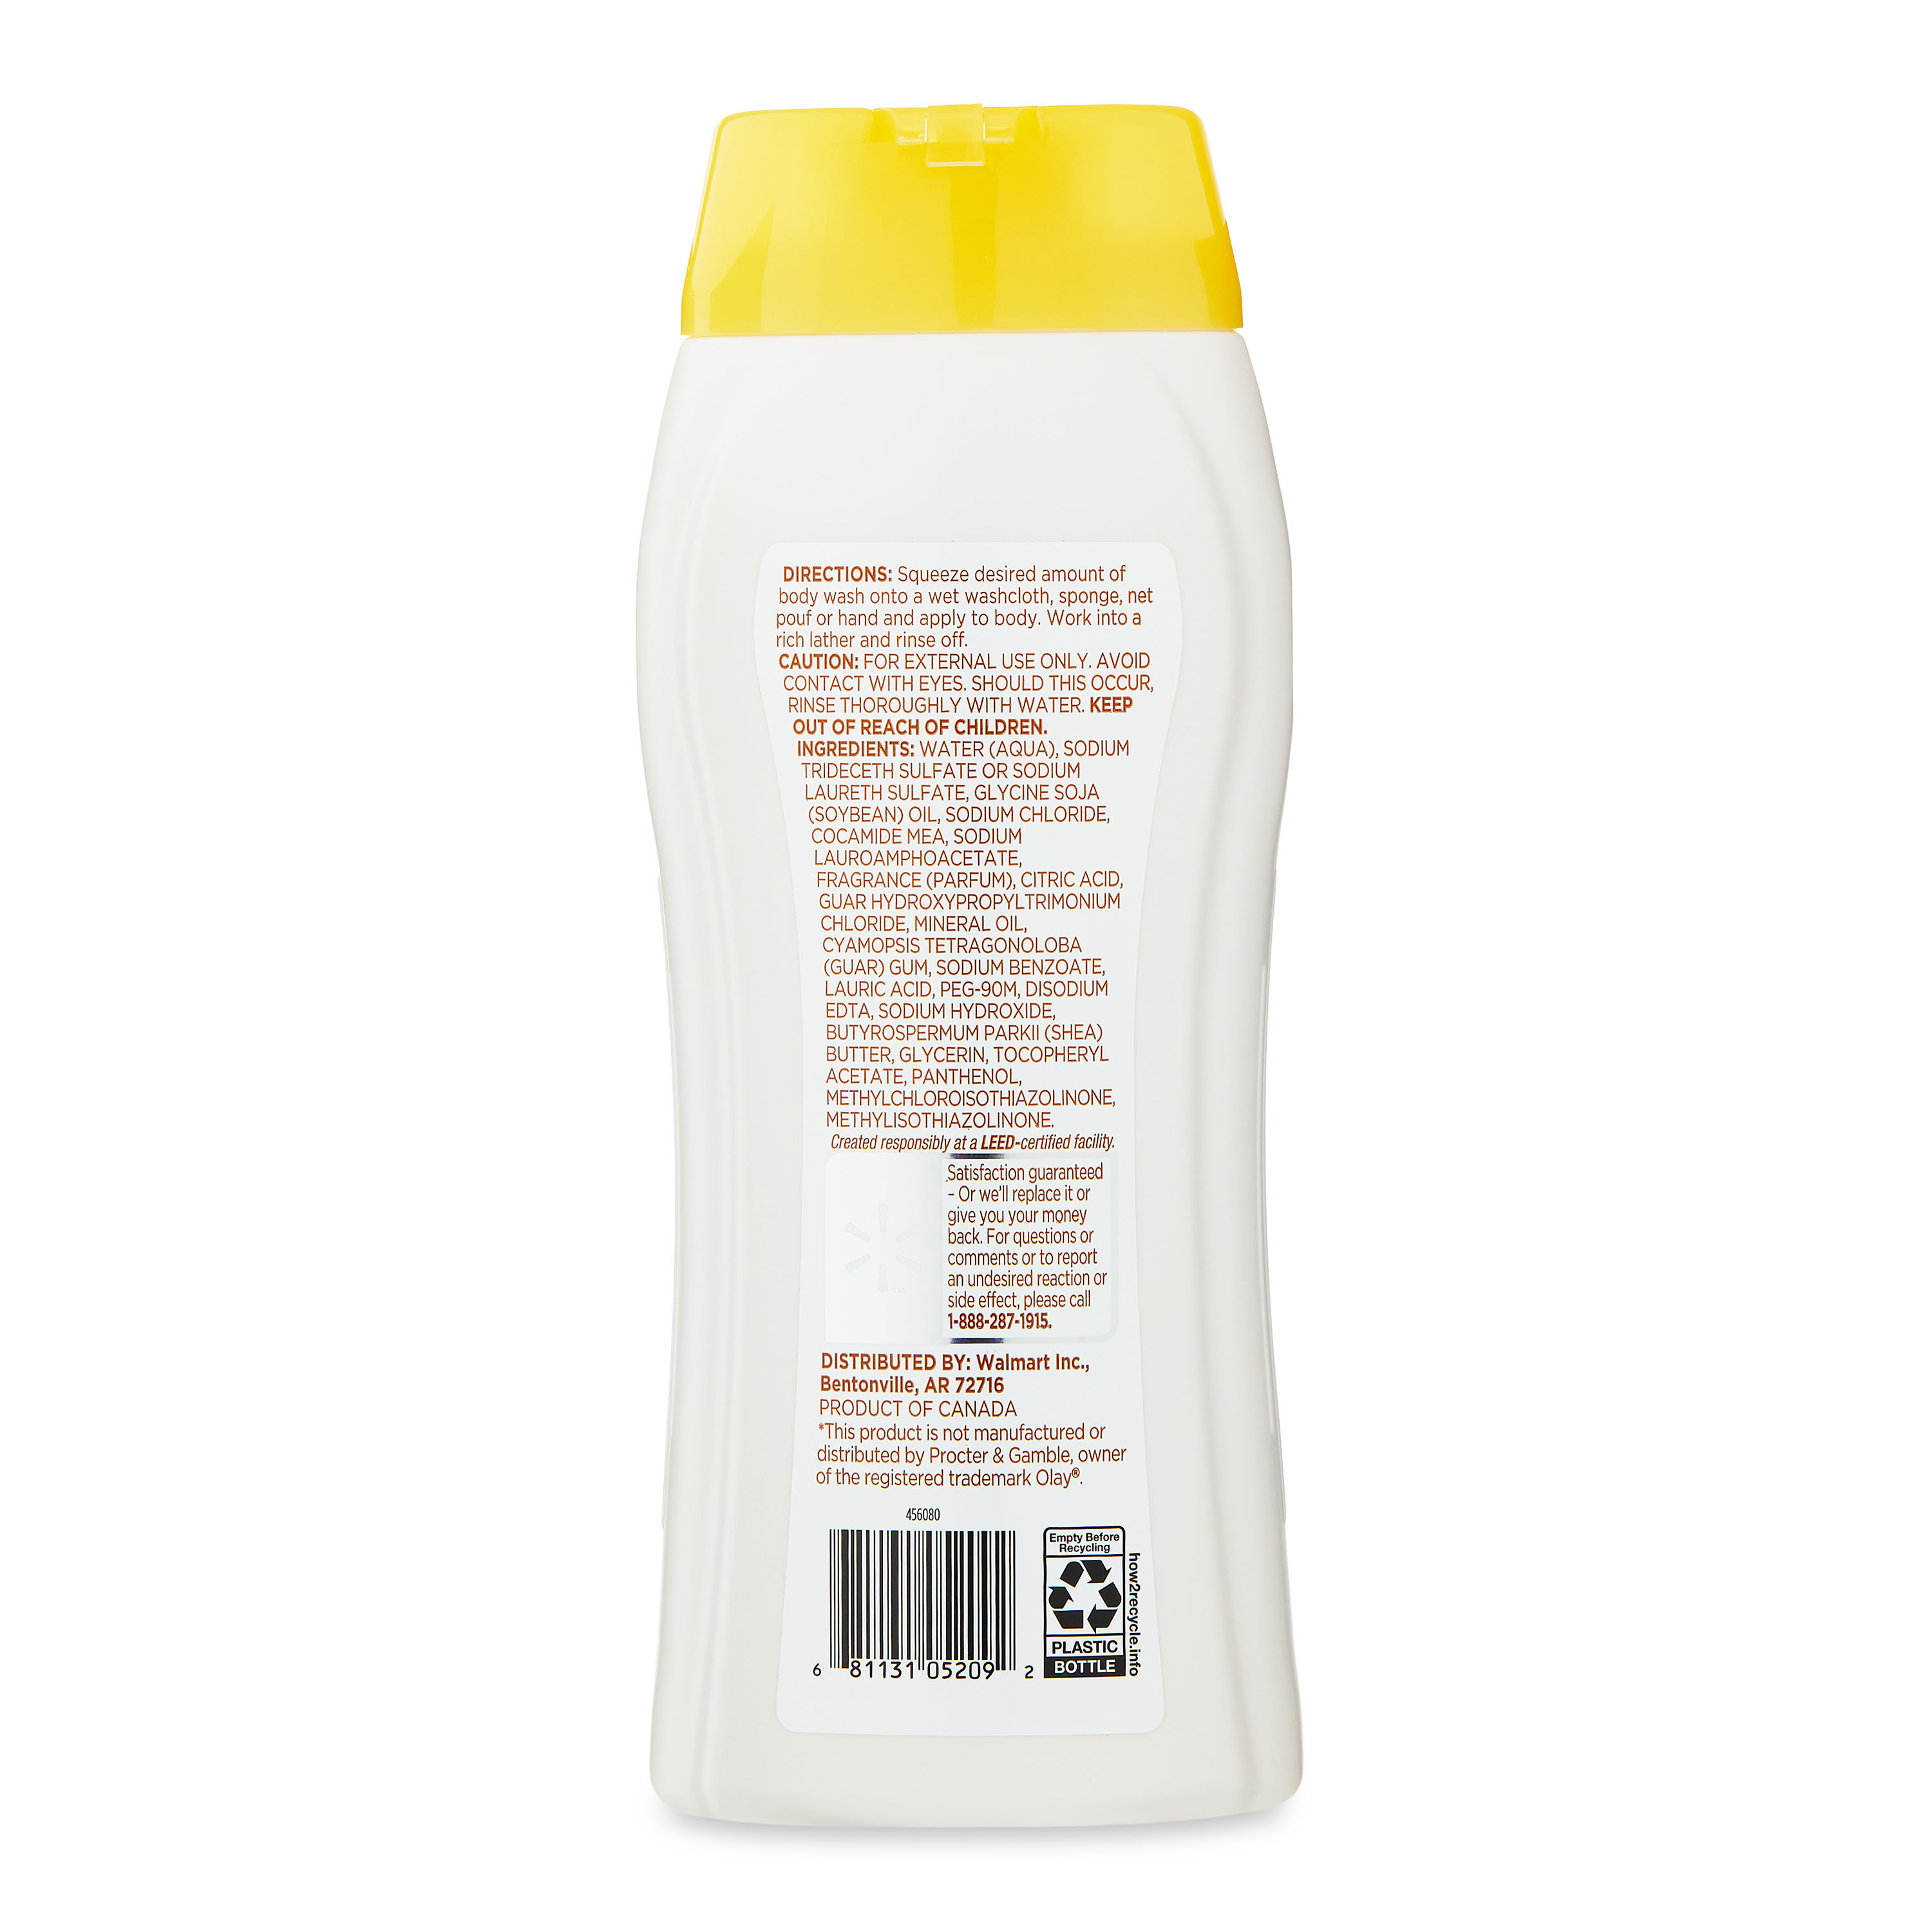 Equate Beauty Total Moisturizing Body Wash with Shea Butter, 23.6 fl oz - image 5 of 7